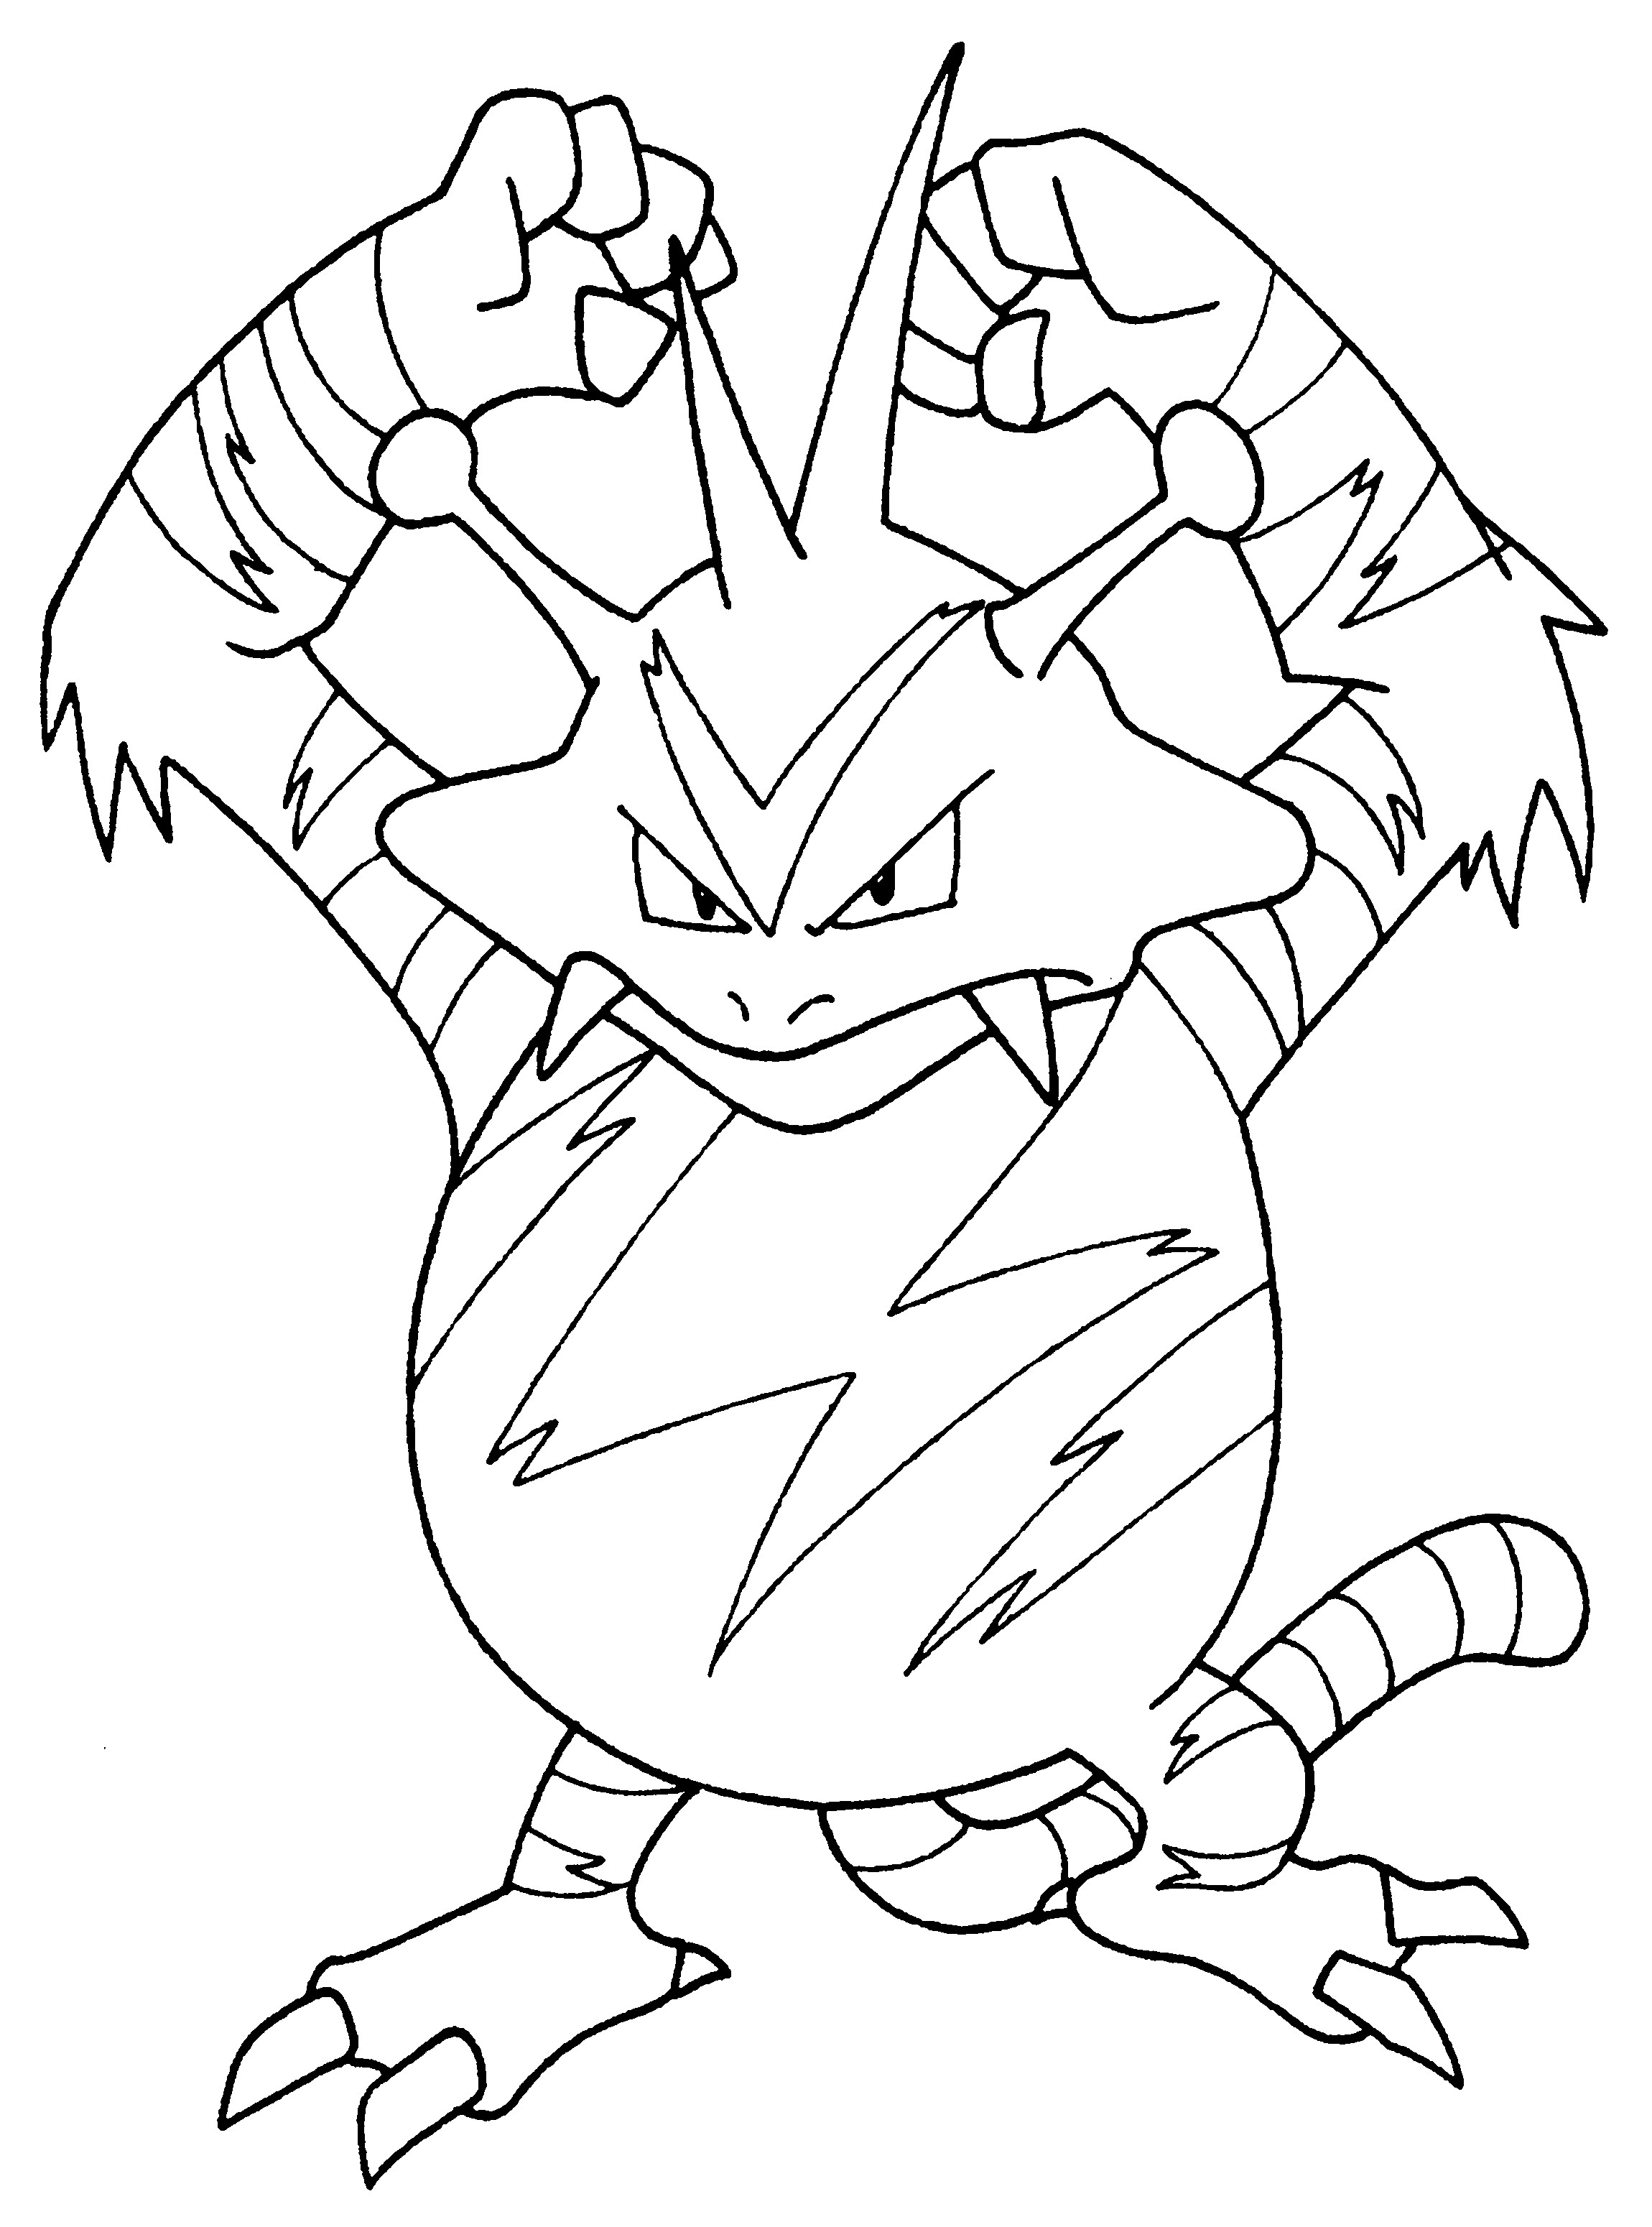 Pokeman Coloring Pages
 Pokemon Coloring Pages Join your favorite Pokemon on an